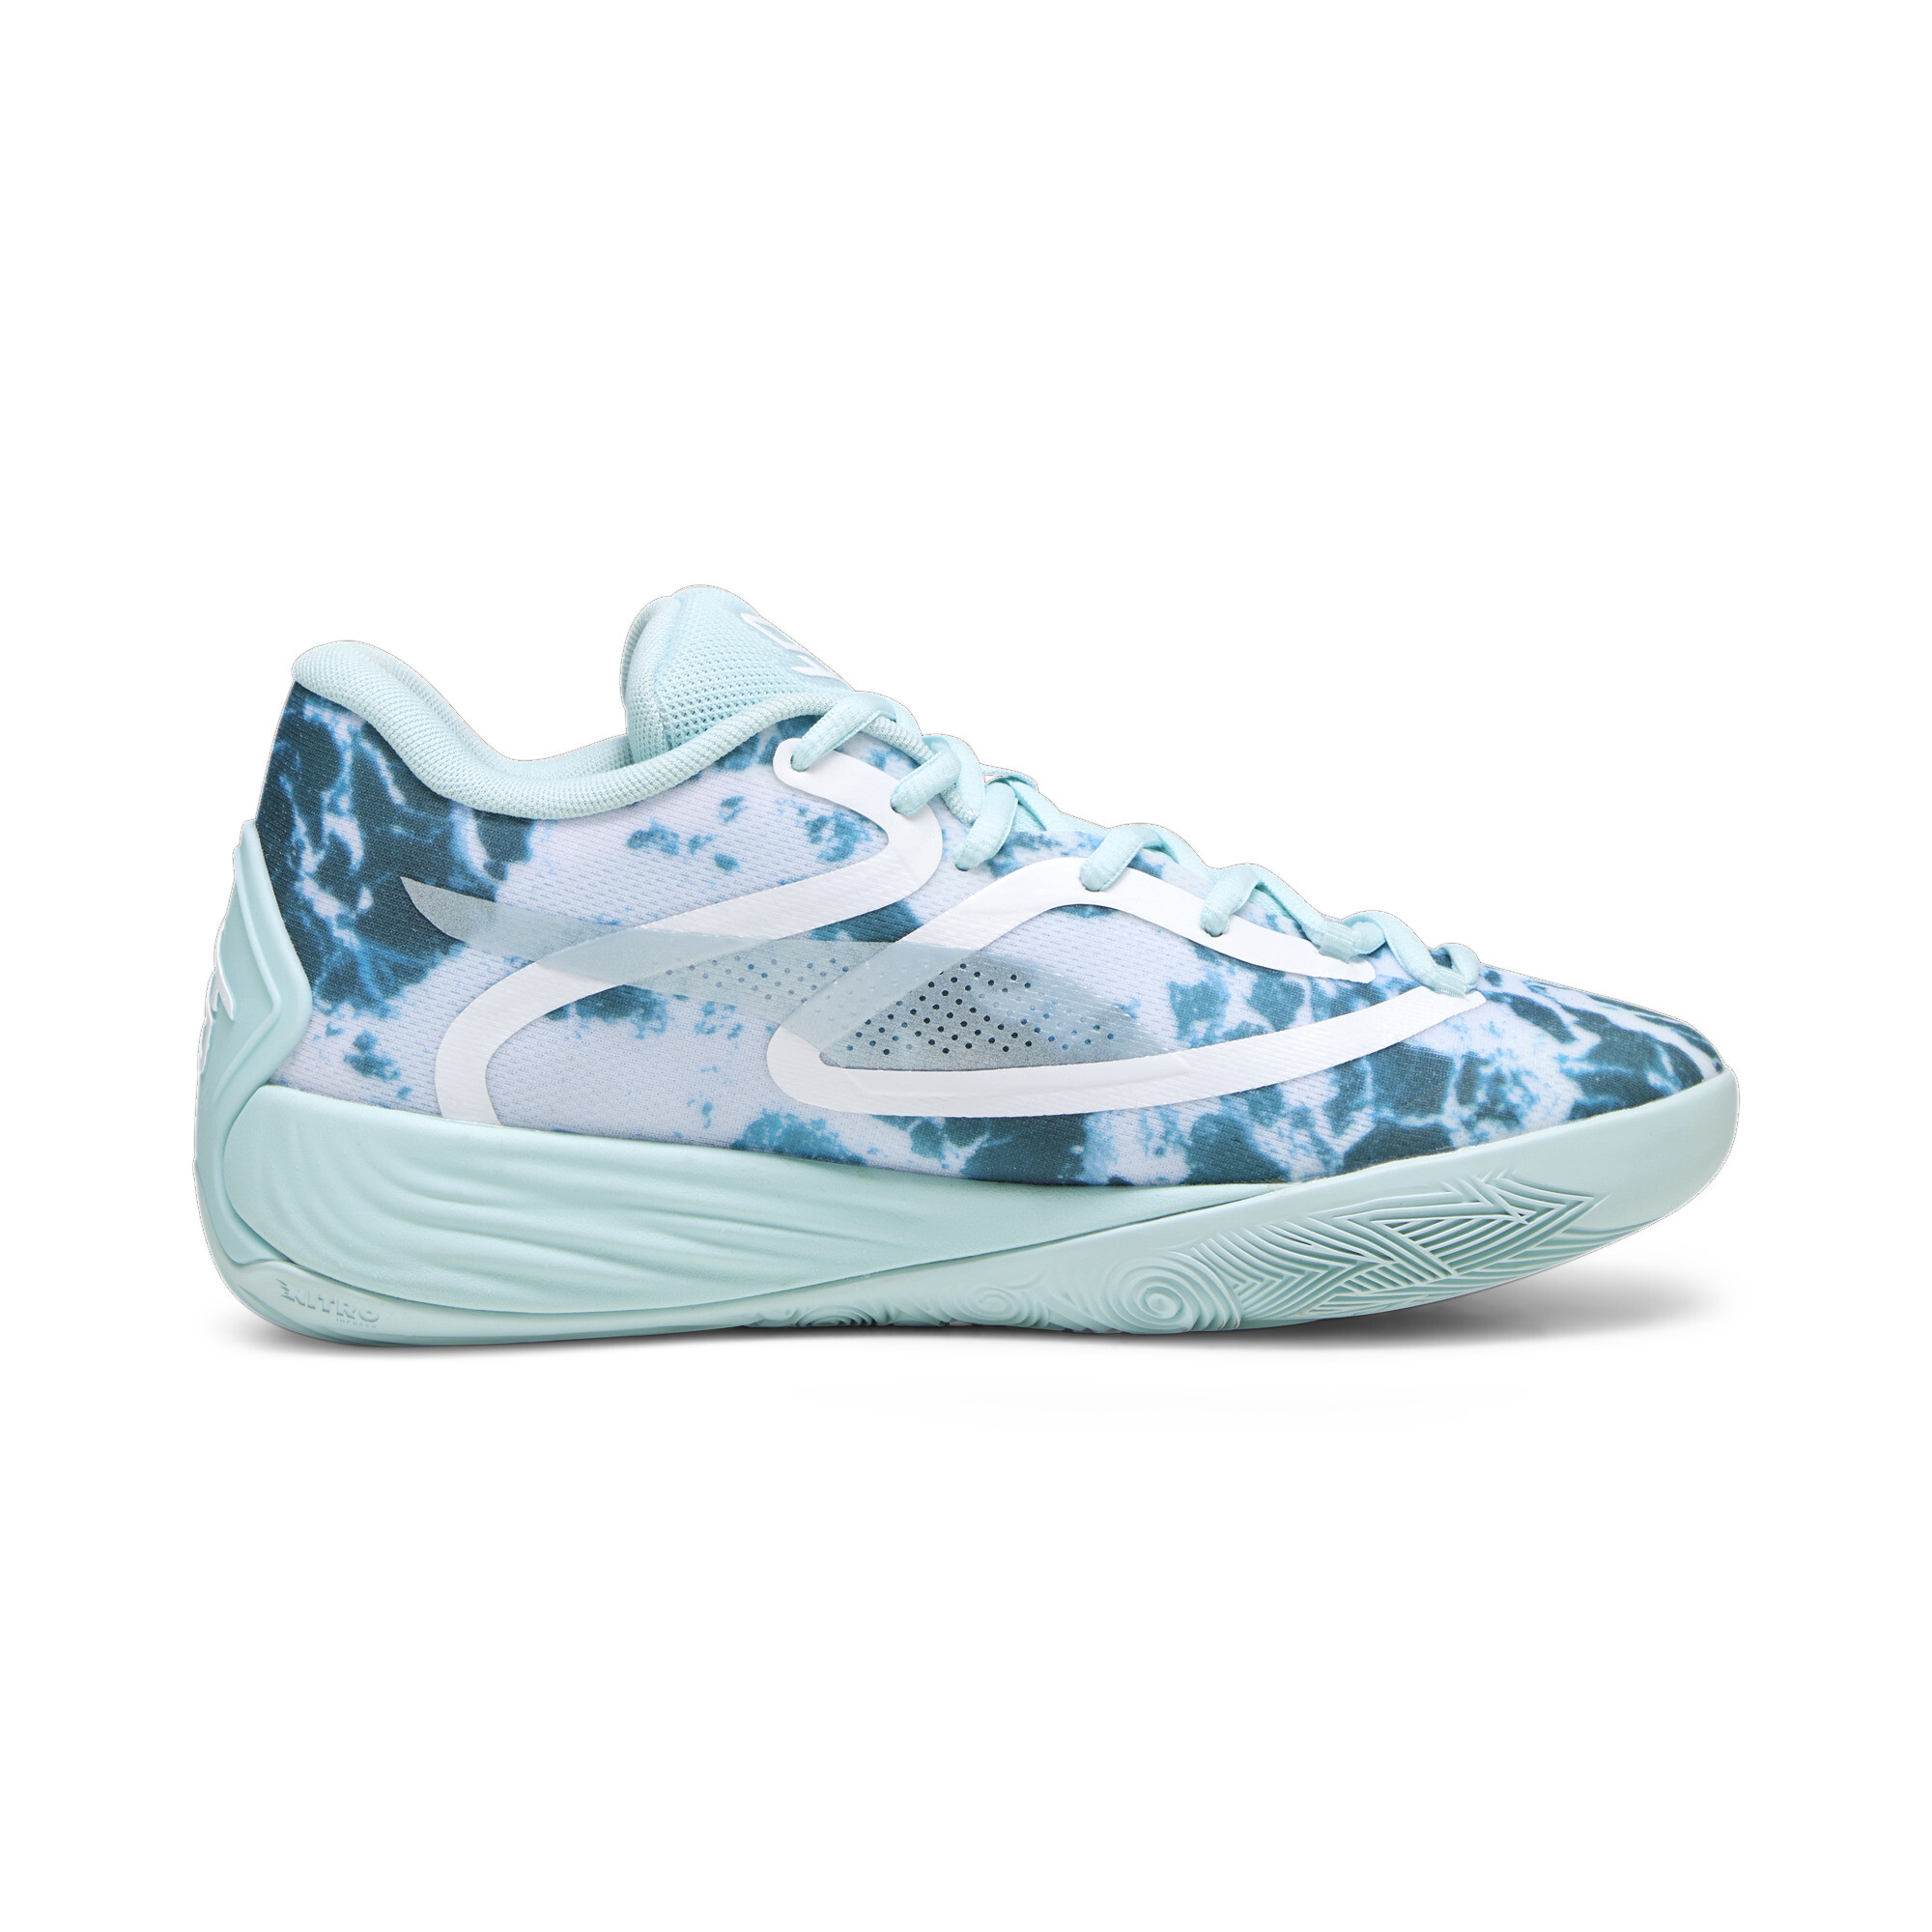 Women's Puma Stewie 2 Water's Basketball Shoes, Blue, Size 46, Shoes